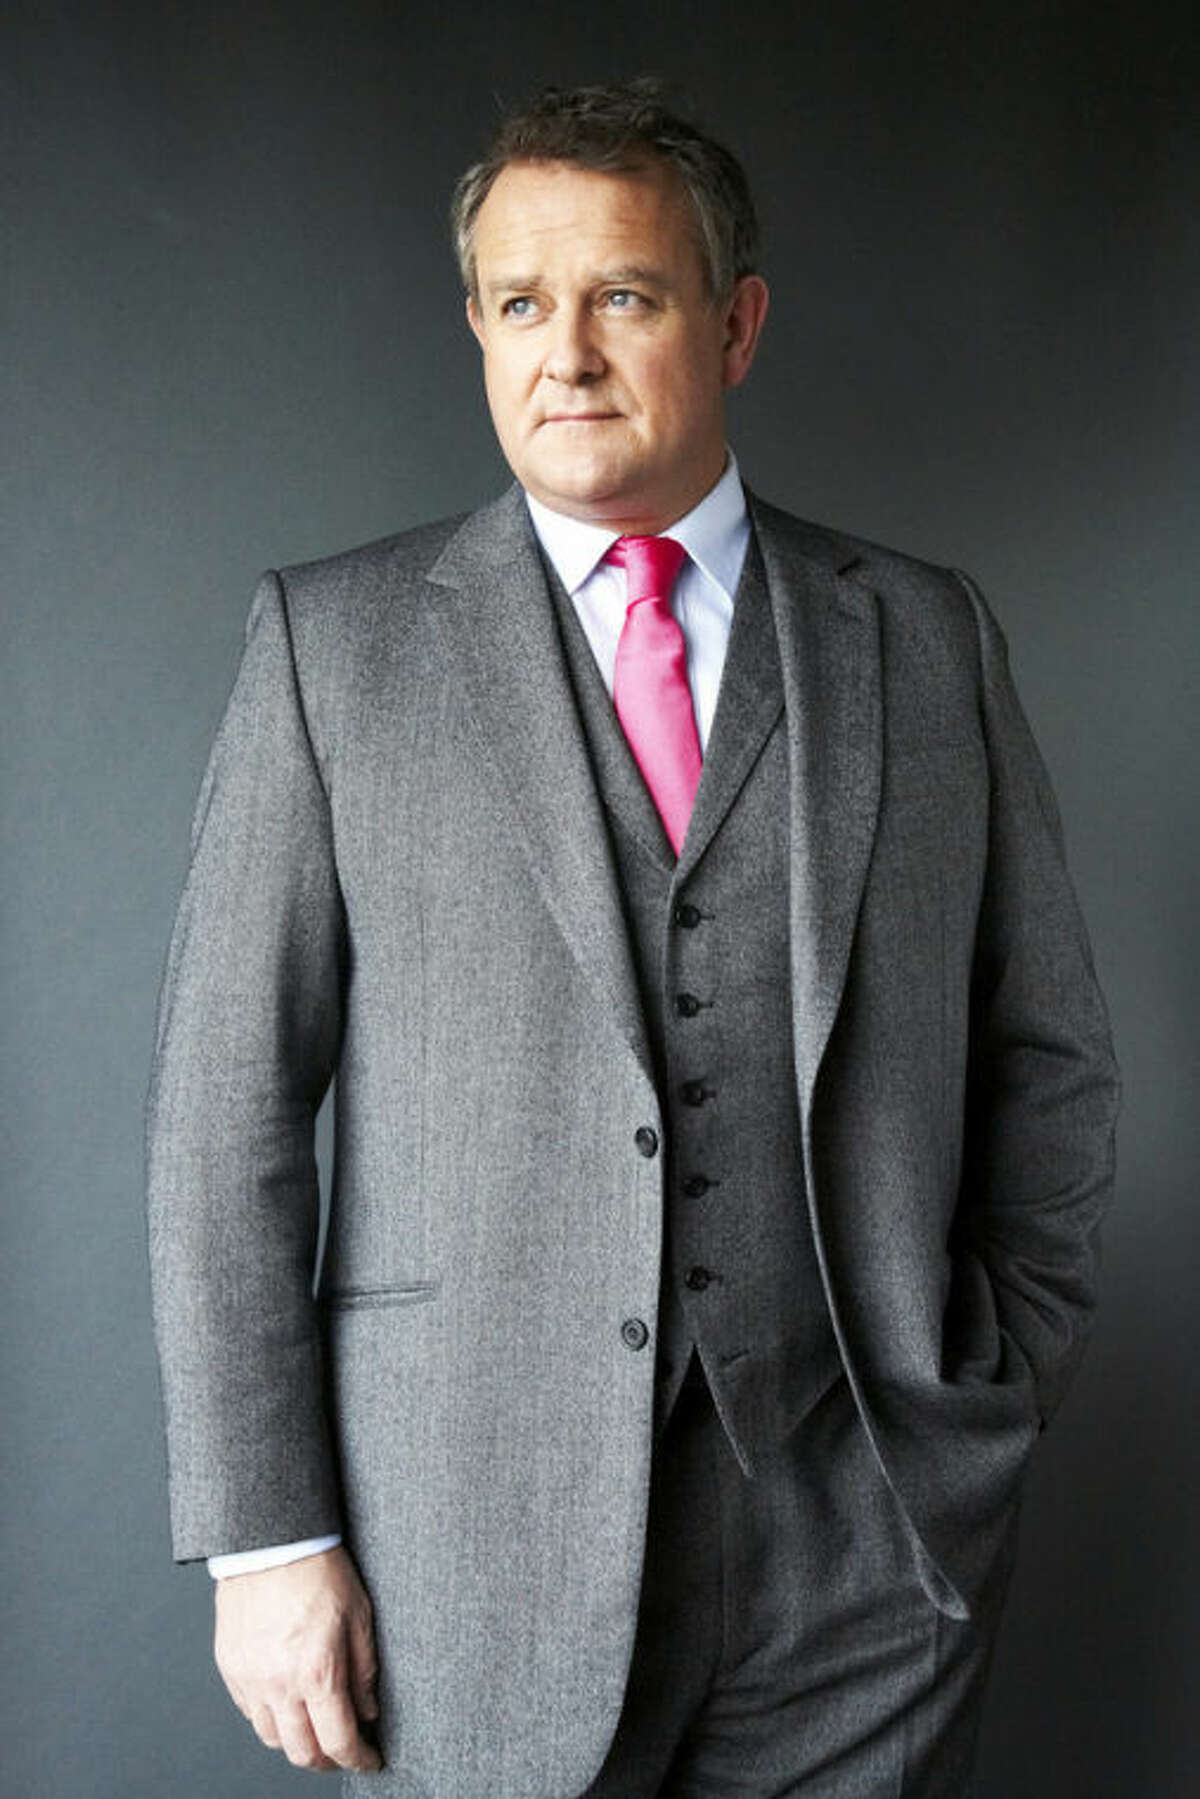 FILE - This Dec. 12, 2012 file photo shows British actor Hugh Bonneville in New York. Bonneville portrays the patriarchal Lord Grantham in the series, "Downton Abbey." The season three finale airs Sunday, Feb., 17 on PBS. (Photo by Dan Hallman/Invision/AP)